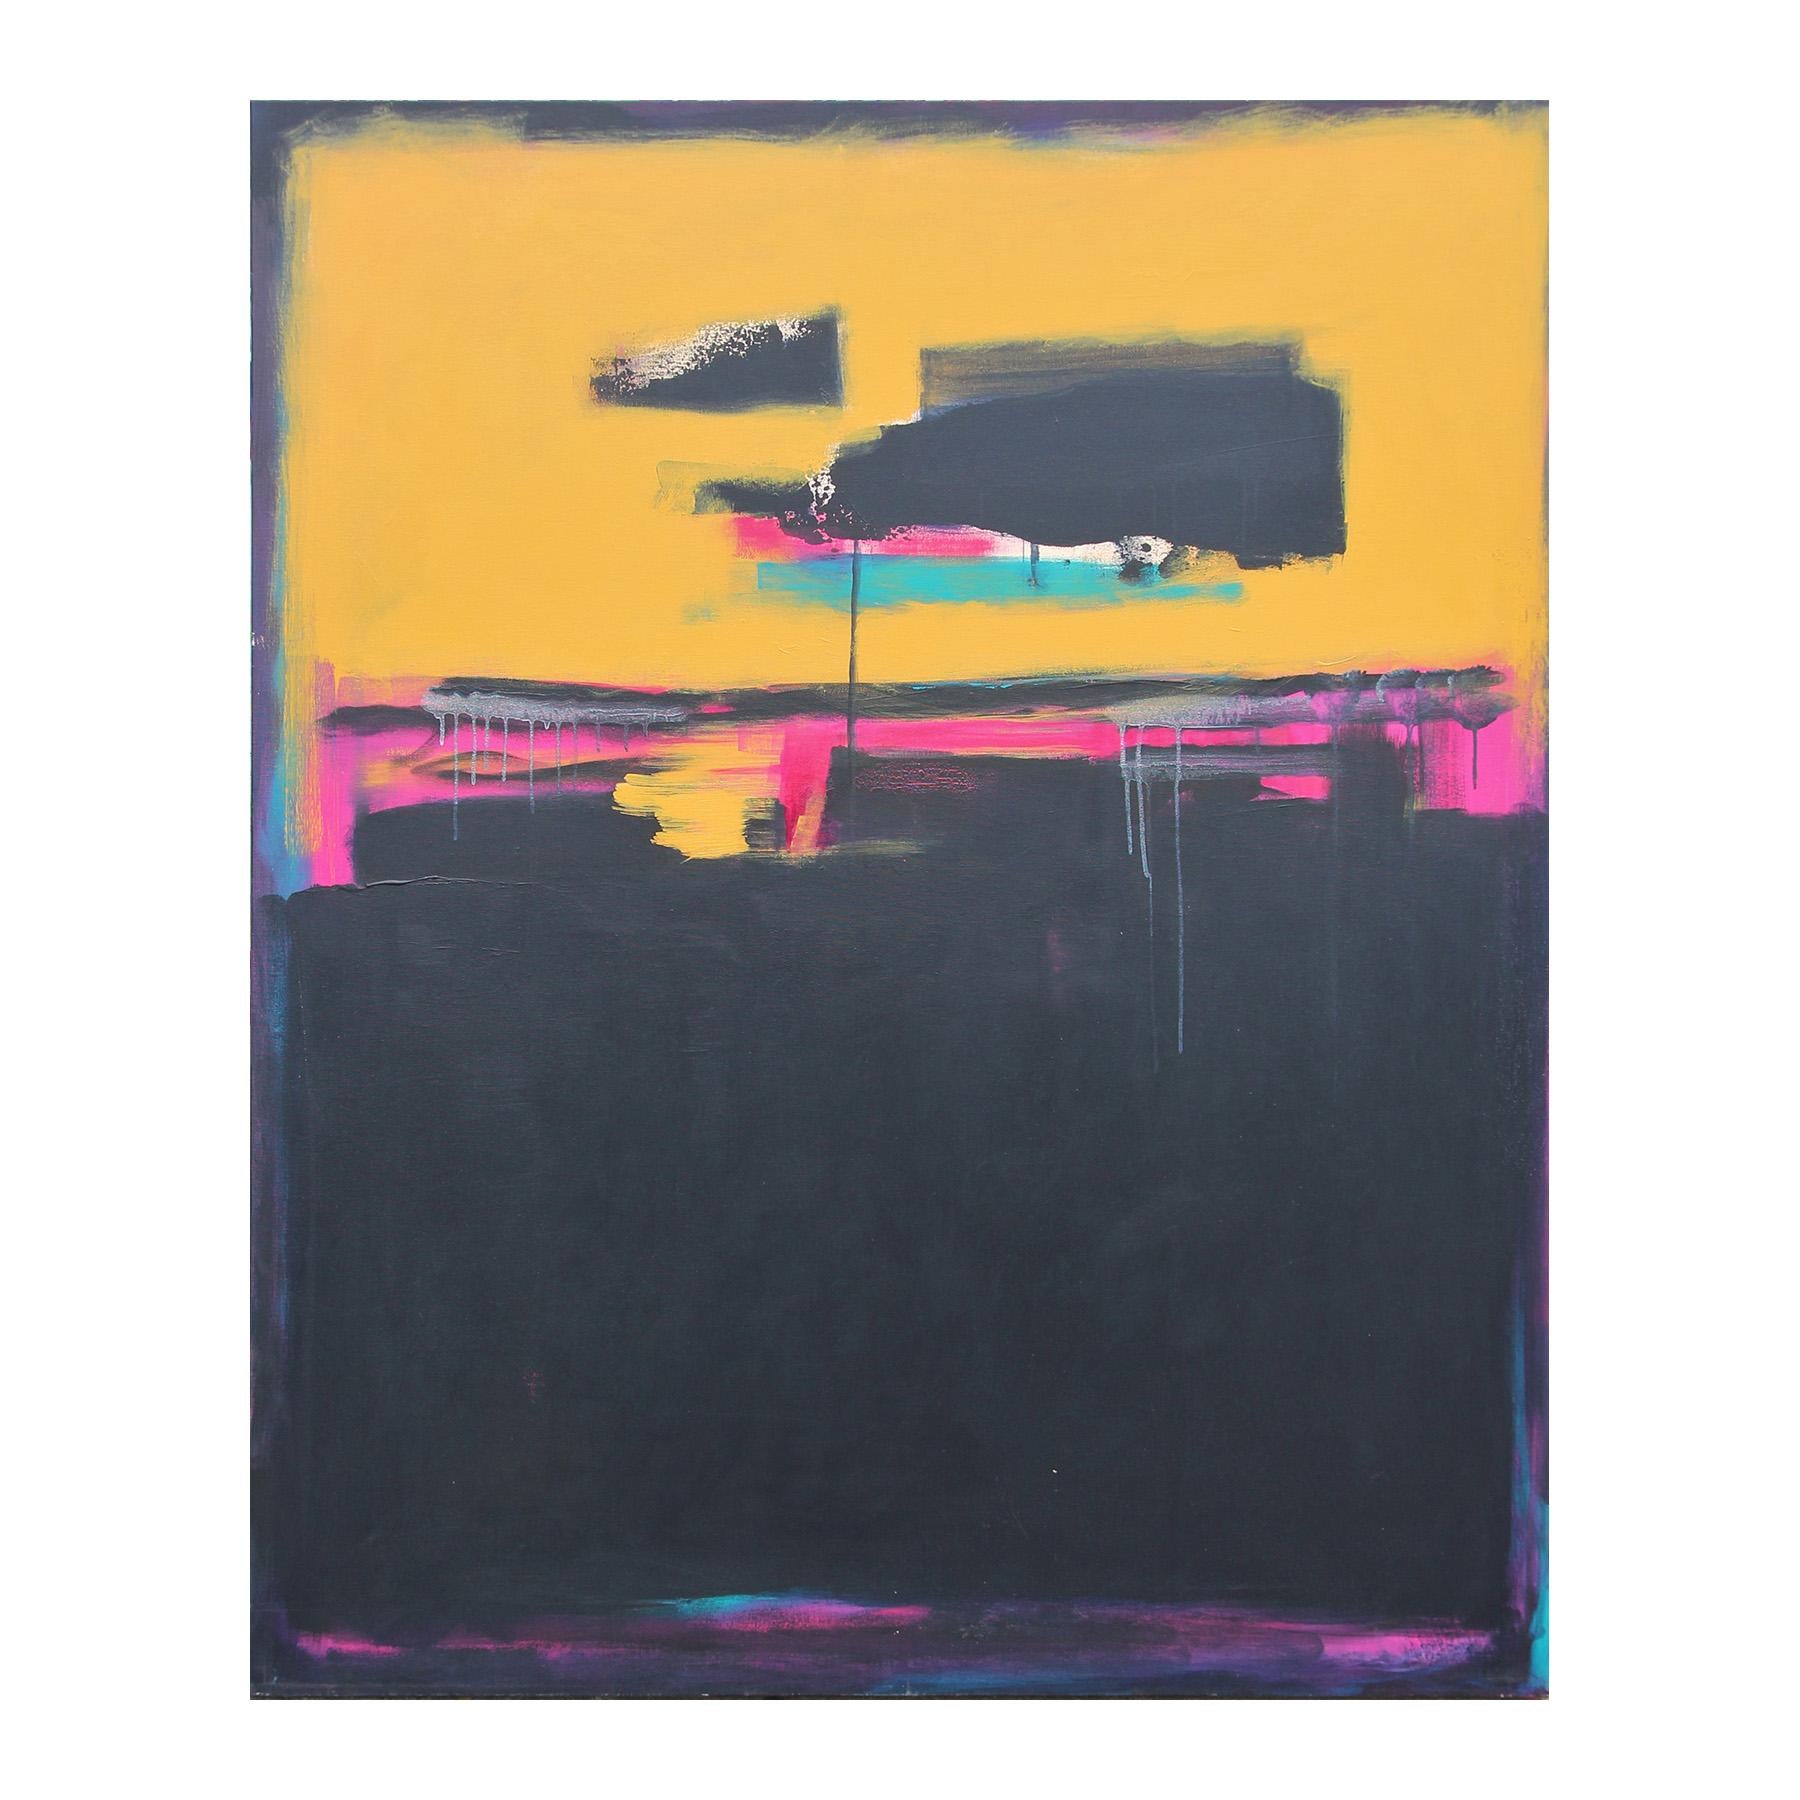 Karen Lastre Landscape Painting - “Reflections of the Past” Blue, Yellow, and Pink Abstract Expressionist Painting